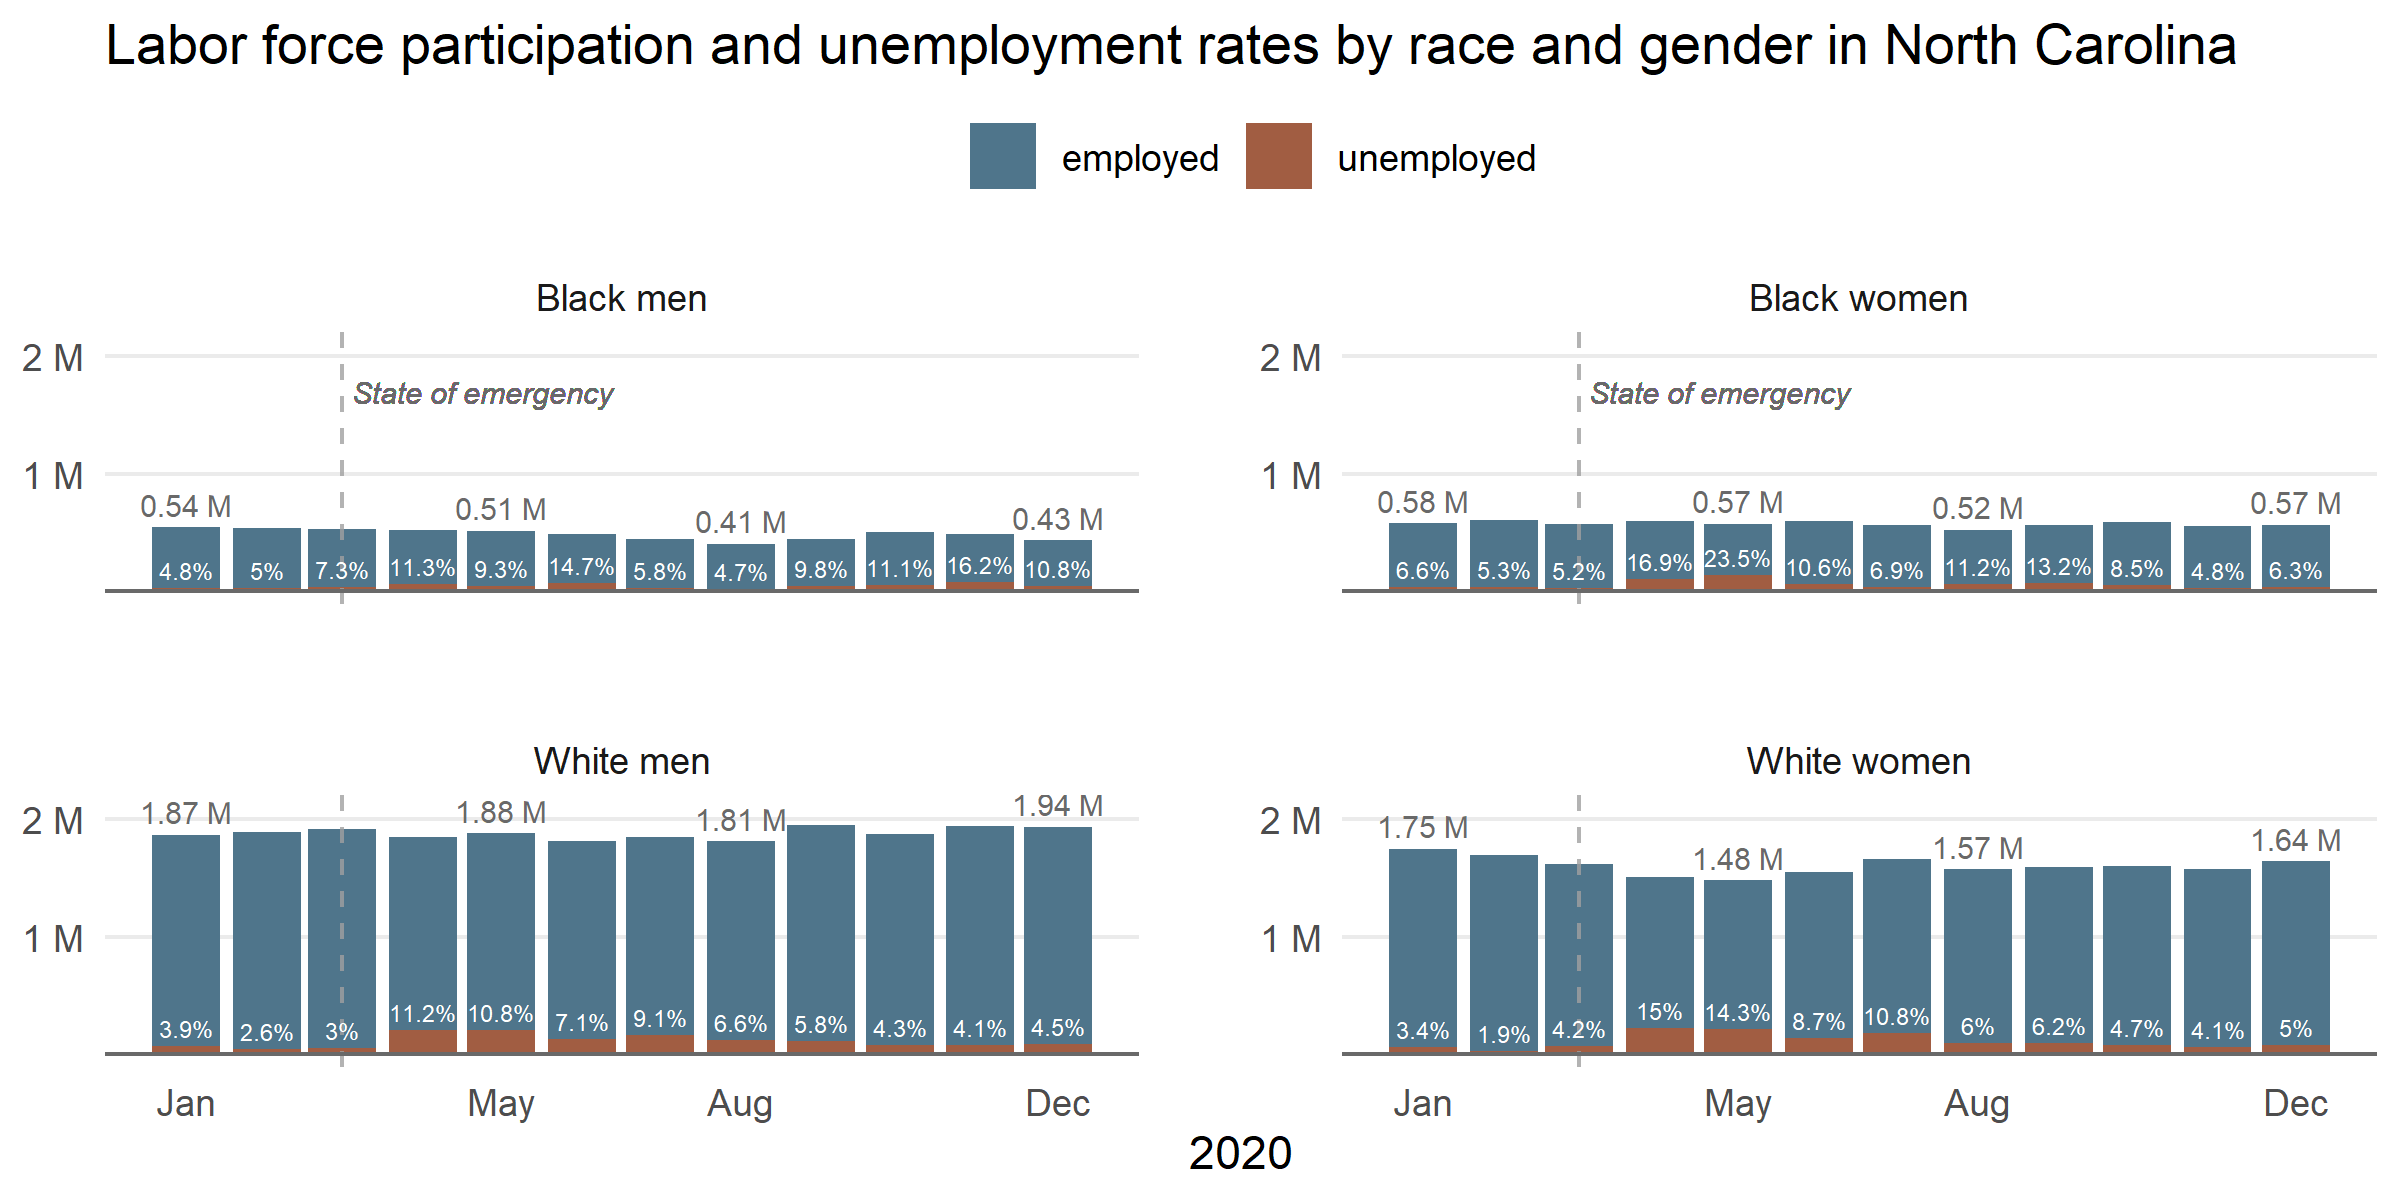 Image description: Title: "Labor force participation and unemployment rates by race and gender in North Carolina." Four bar charts compare monthly labor force totals for Black men (top left), Black women (top right), White men (bottom left), and White women (bottom right) in 2020, with each bar comprised of blue (employed) and red (unemployed) sections. Bar labels show the unemployment rate for each subgroup for each month in white, and selected months (April, August, and December) also have total labor force estimates in black at the top.